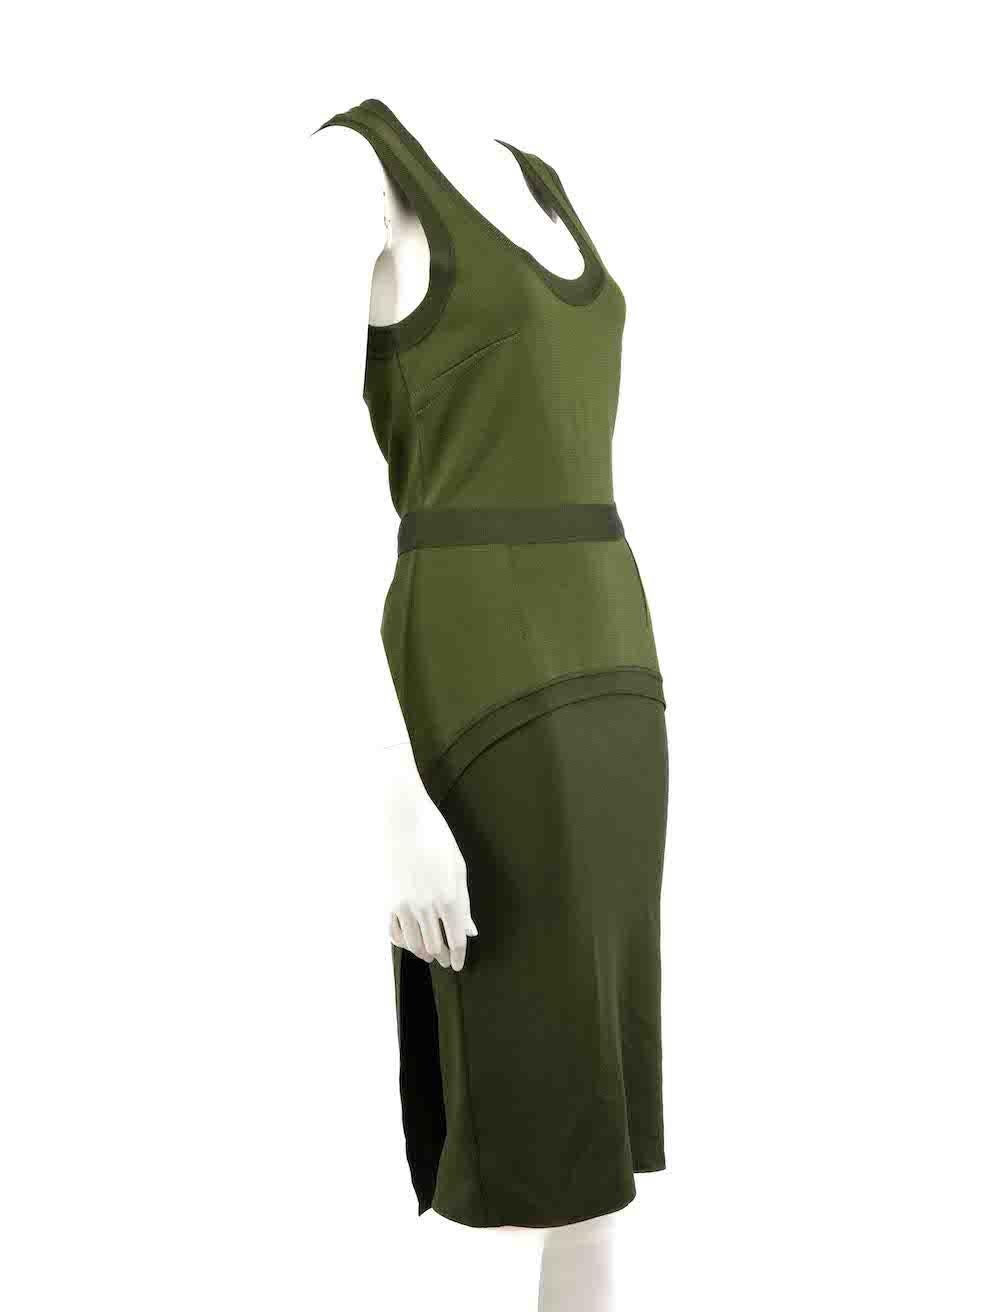 CONDITION is Very good. Minimal wear to dress is evident. Minimal wear to zipper pull where paint is slightly chipped on this used Givenchy designer resale item.
 
 
 
 Details
 
 
 Green
 
 Viscose
 
 Dress
 
 Layered bodycon detail
 
 Midi
 
